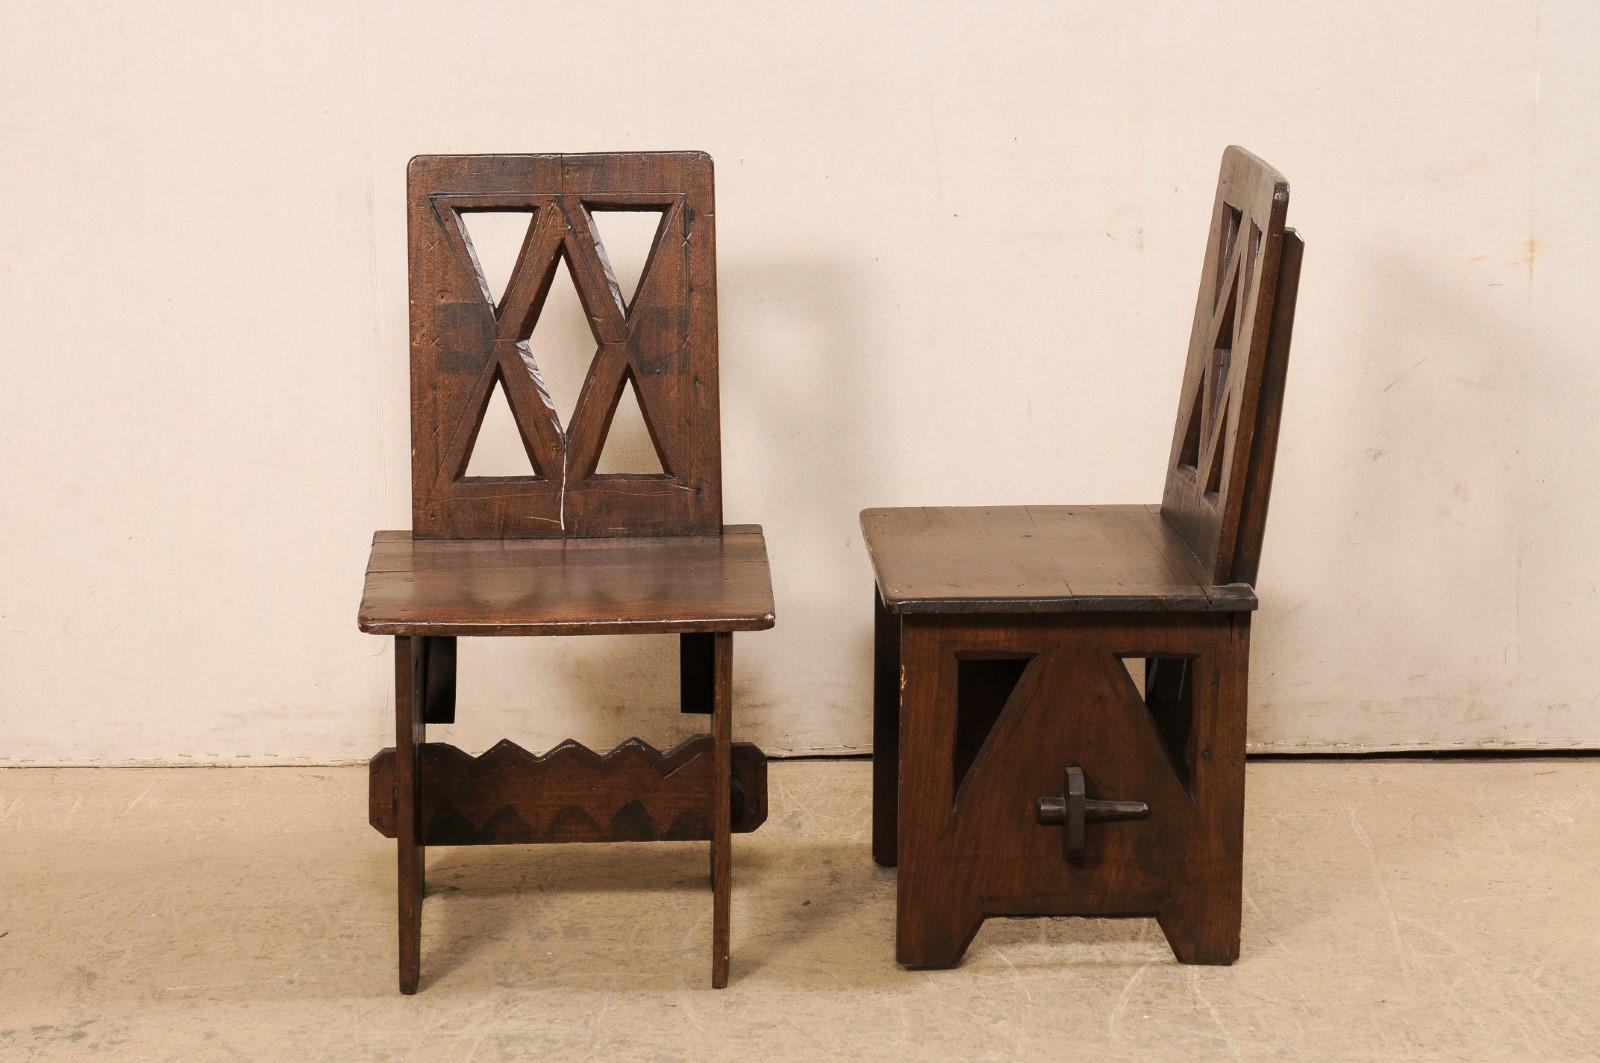 Interesting Pair of Carved Fire-Side Chairs W/Geometric Cut-Outs, N. Africa 4